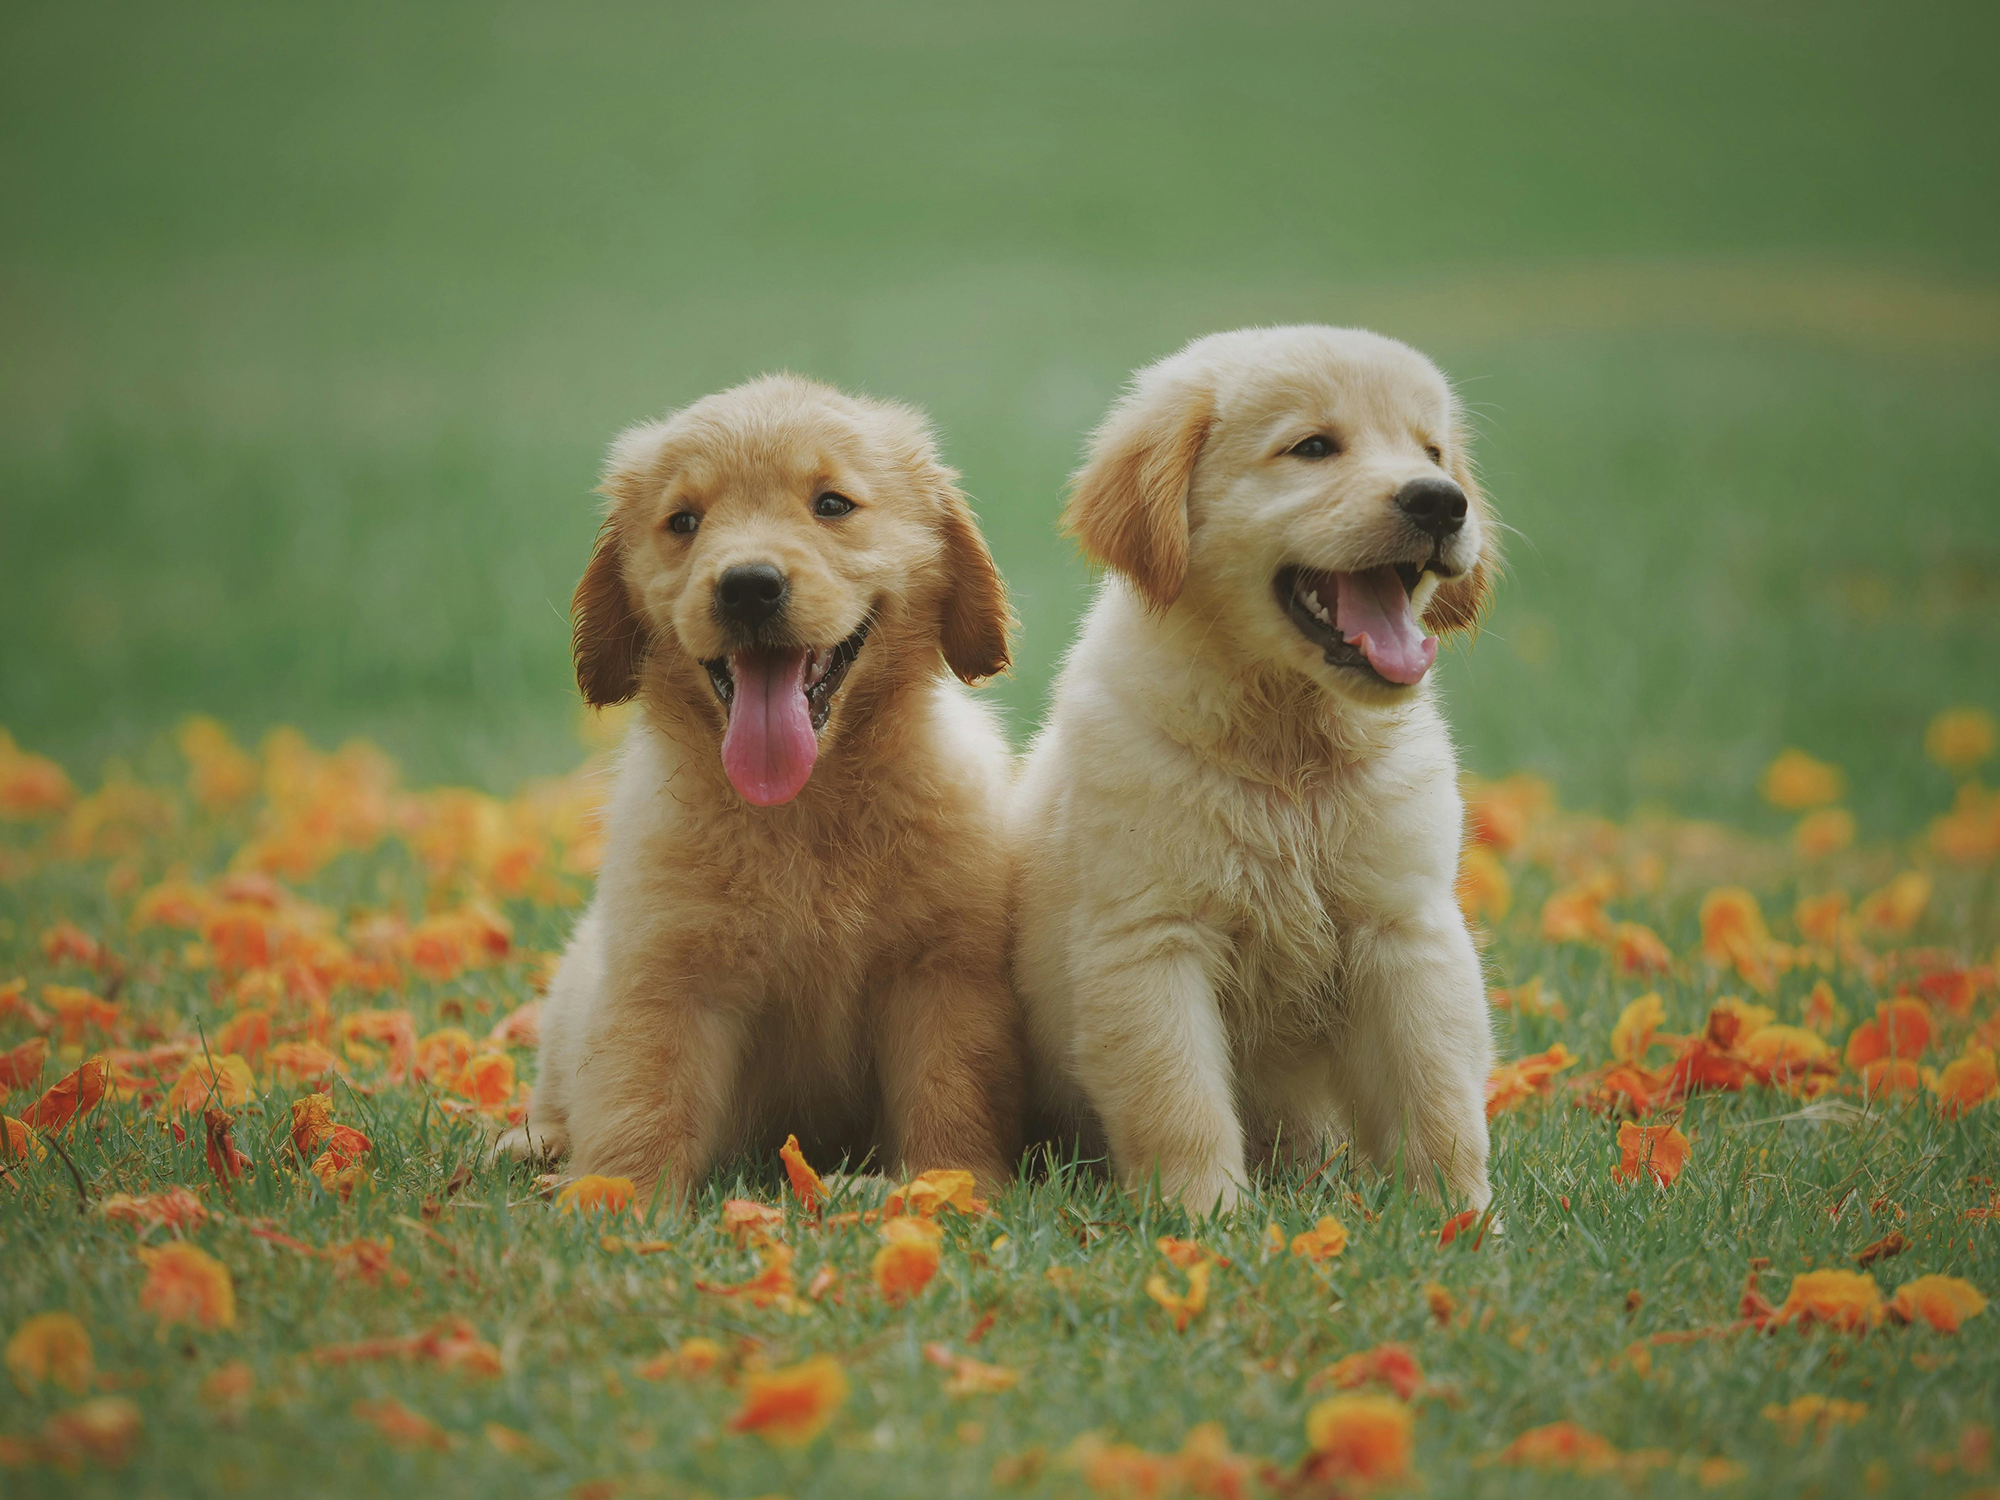 Two puppies in a feild